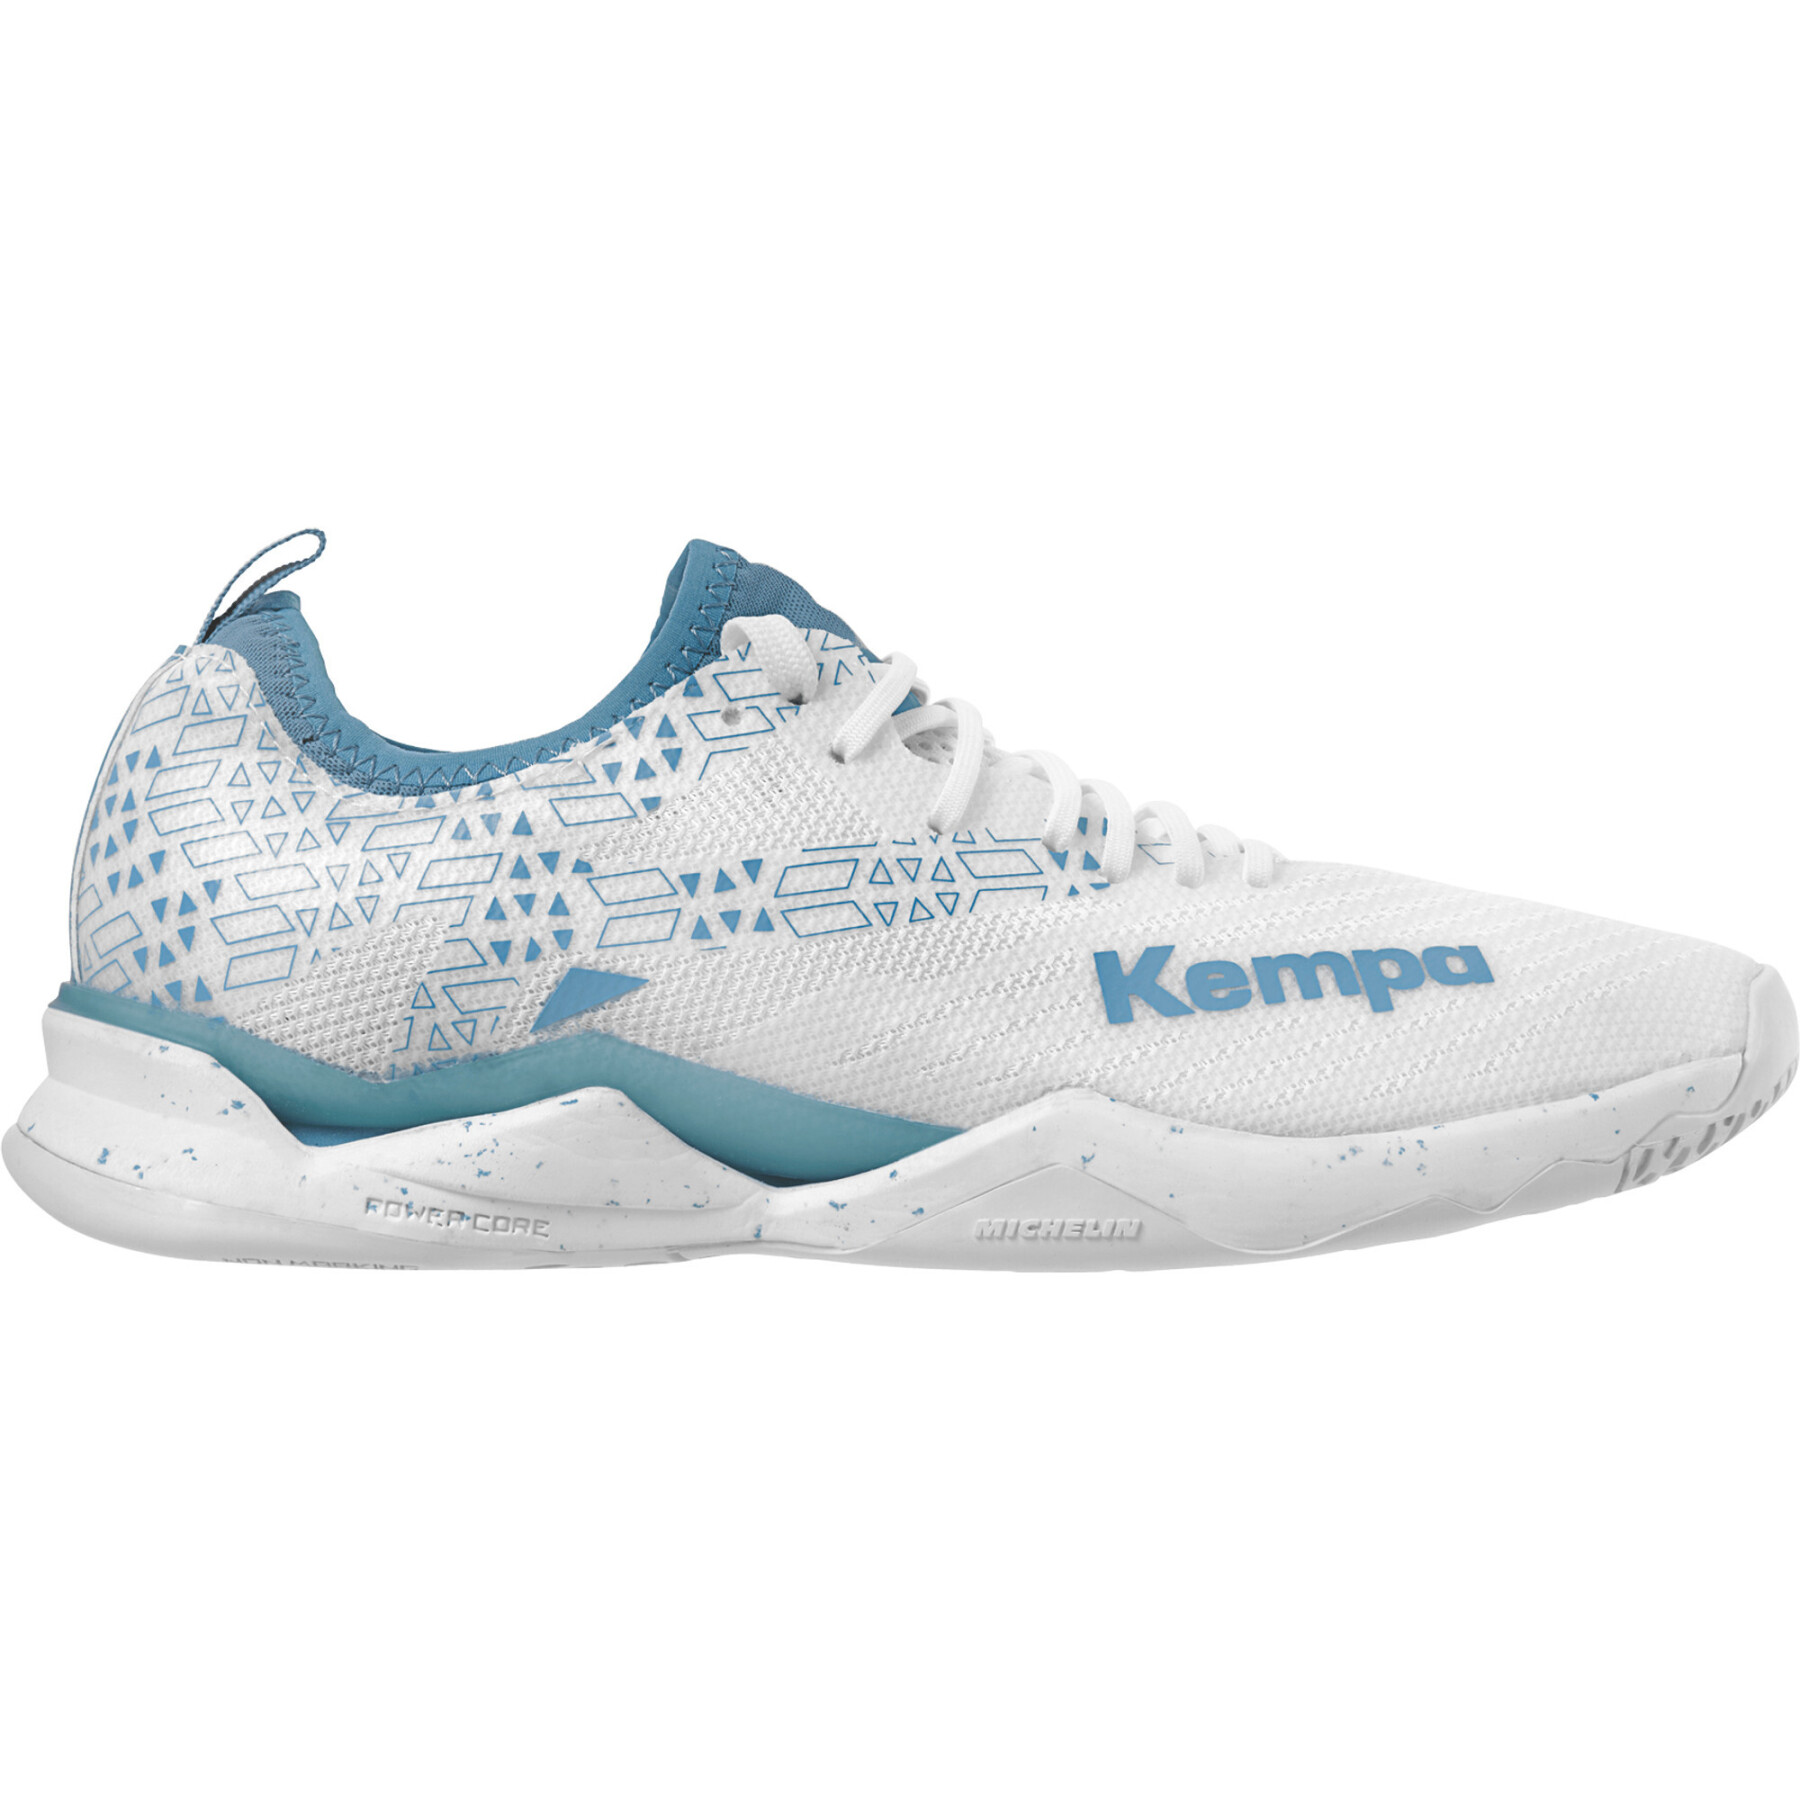 Chaussures indoor femme Kempa Wing Lite 2.0 Game Changer